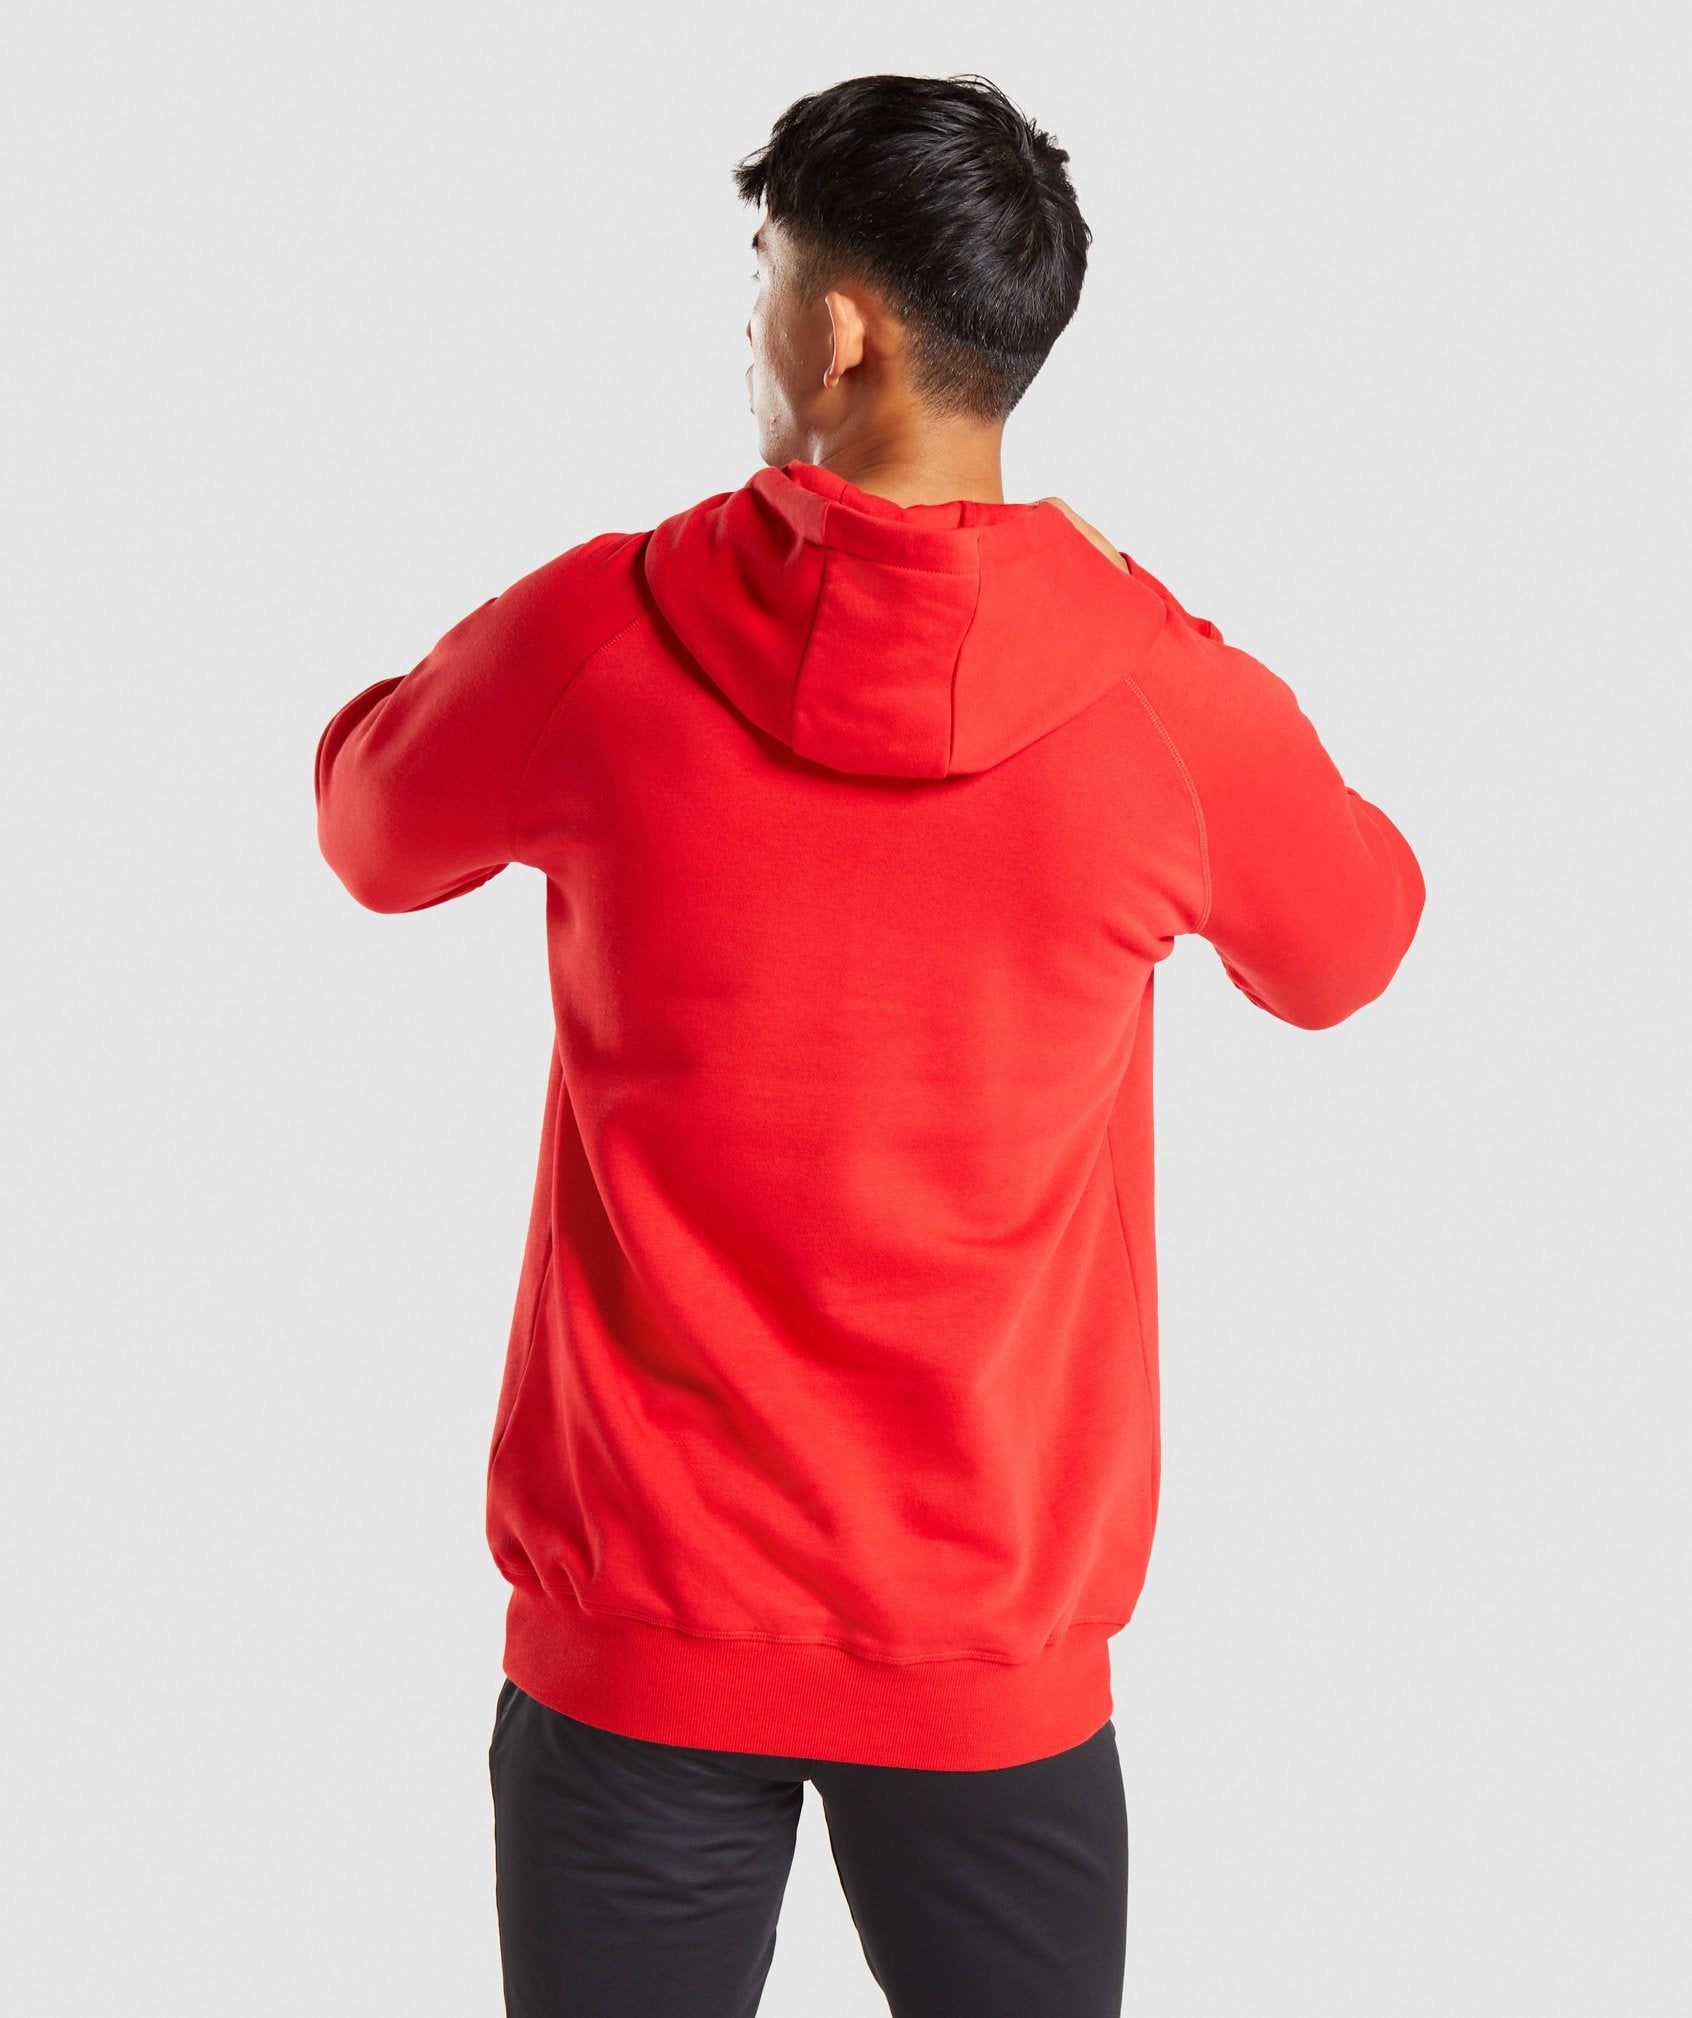 Infill Hoodie in Red - view 2